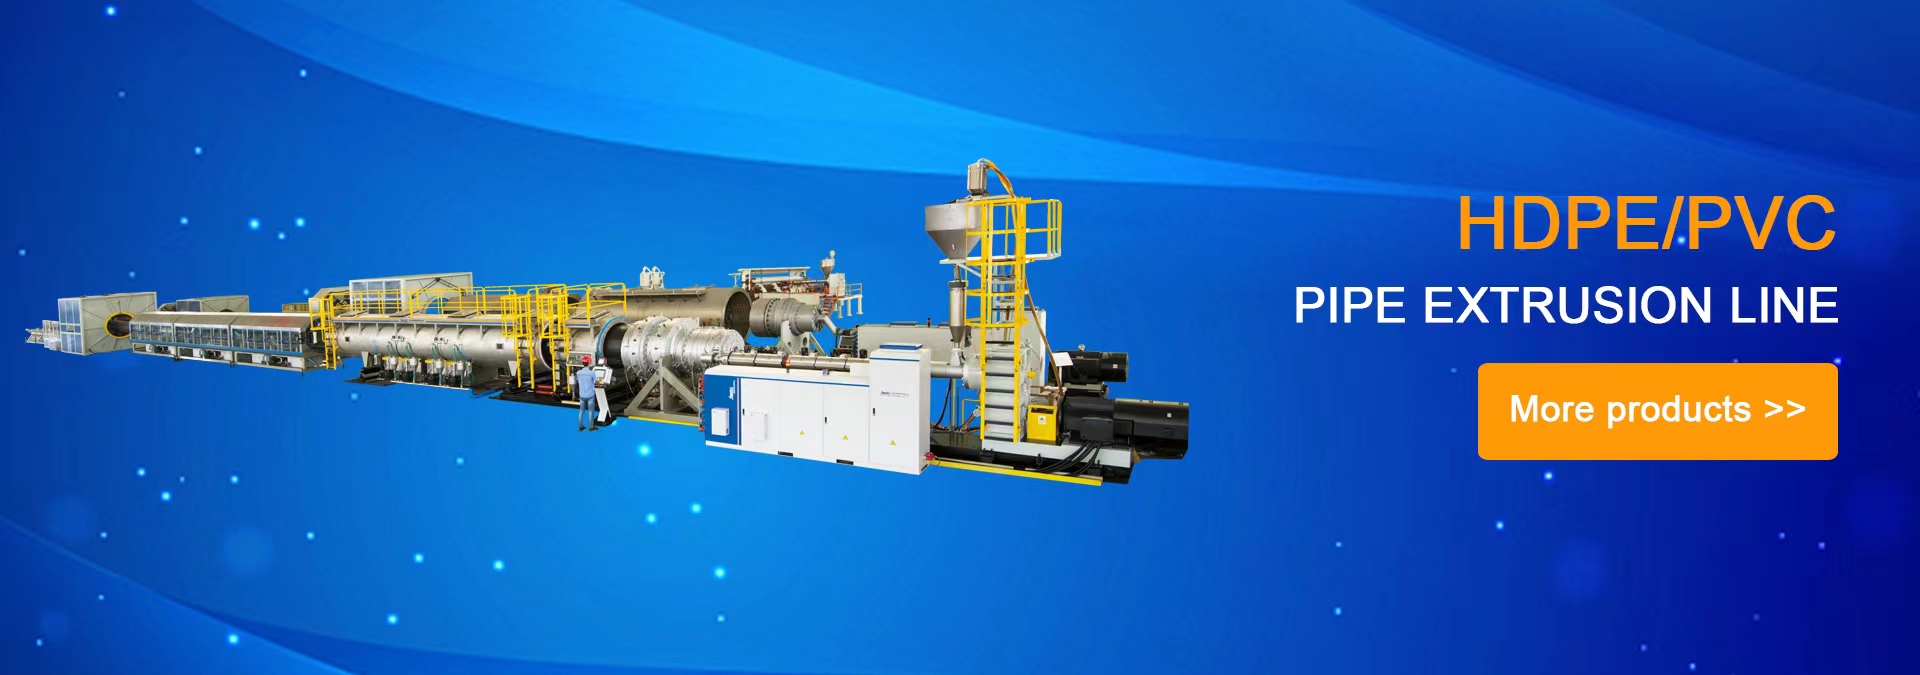 SHEET EXTRUSION LINE